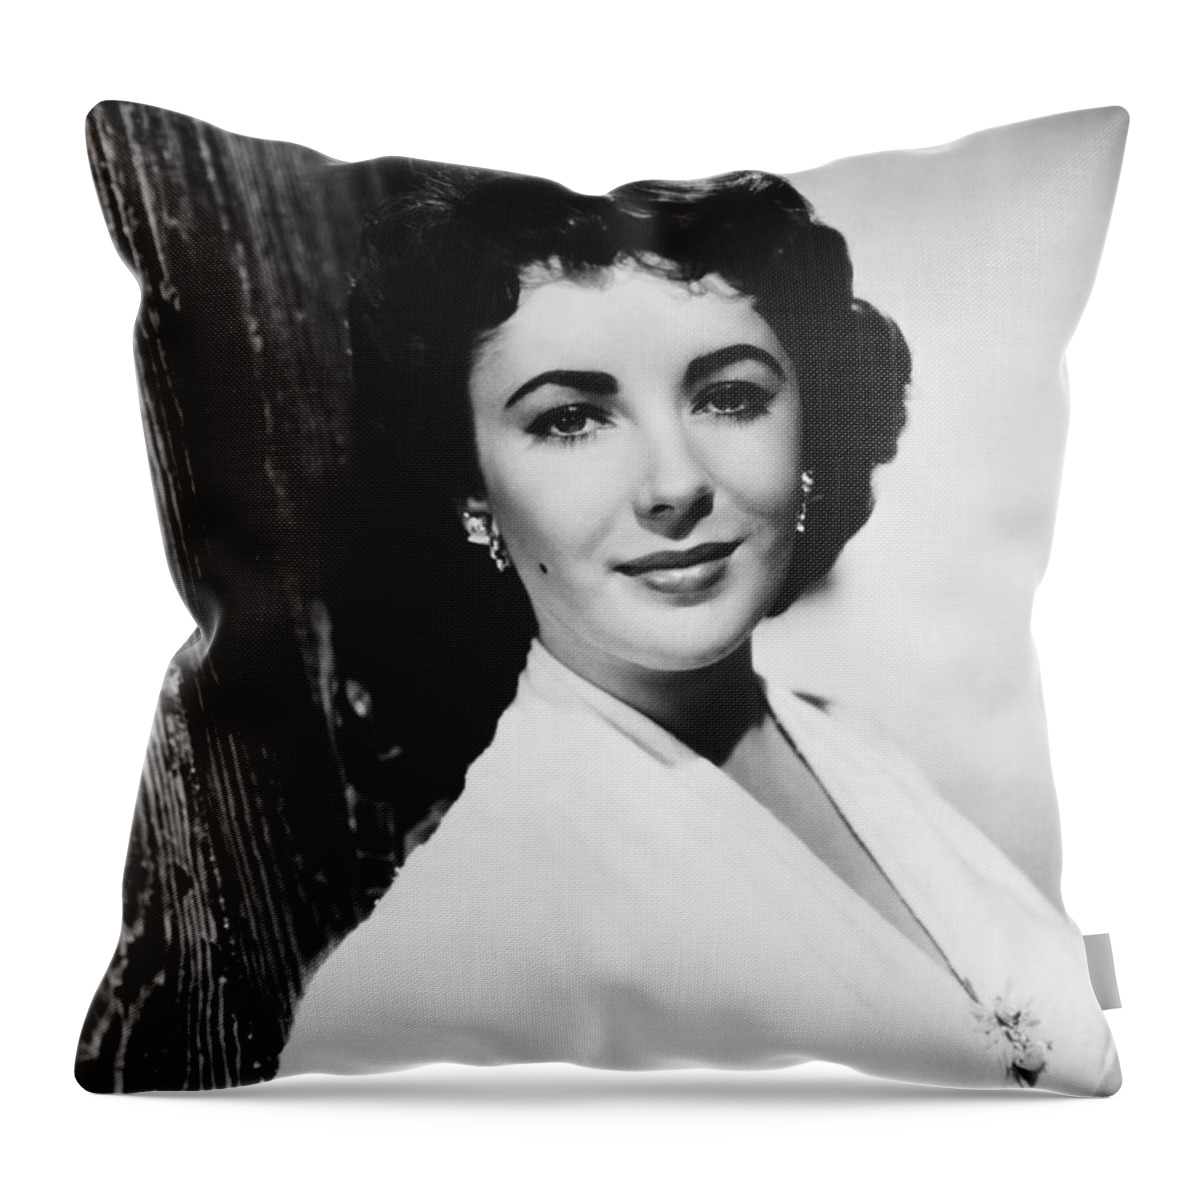 1950's Throw Pillow featuring the photograph Actress Elizabeth Taylor by Underwood Archives